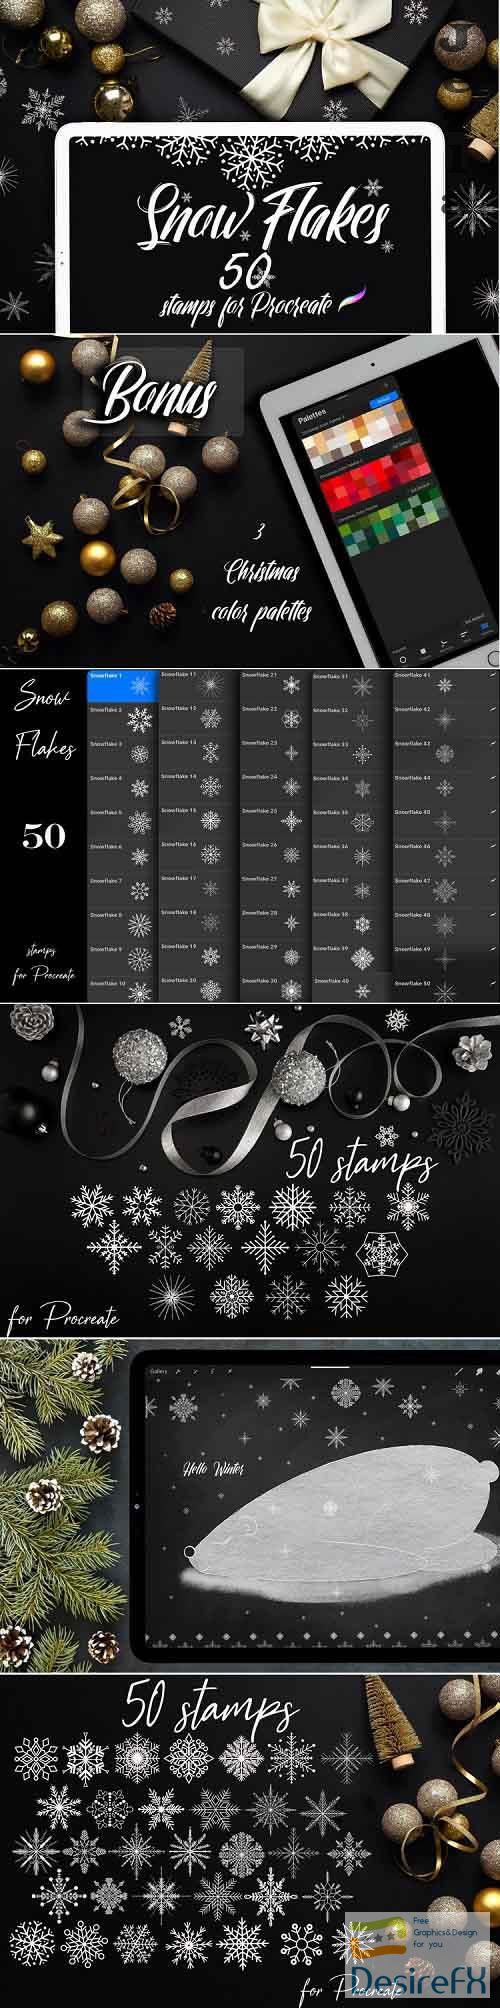 50 Snowflake Stamps for Procreate - 1029308 - Hello Winter!